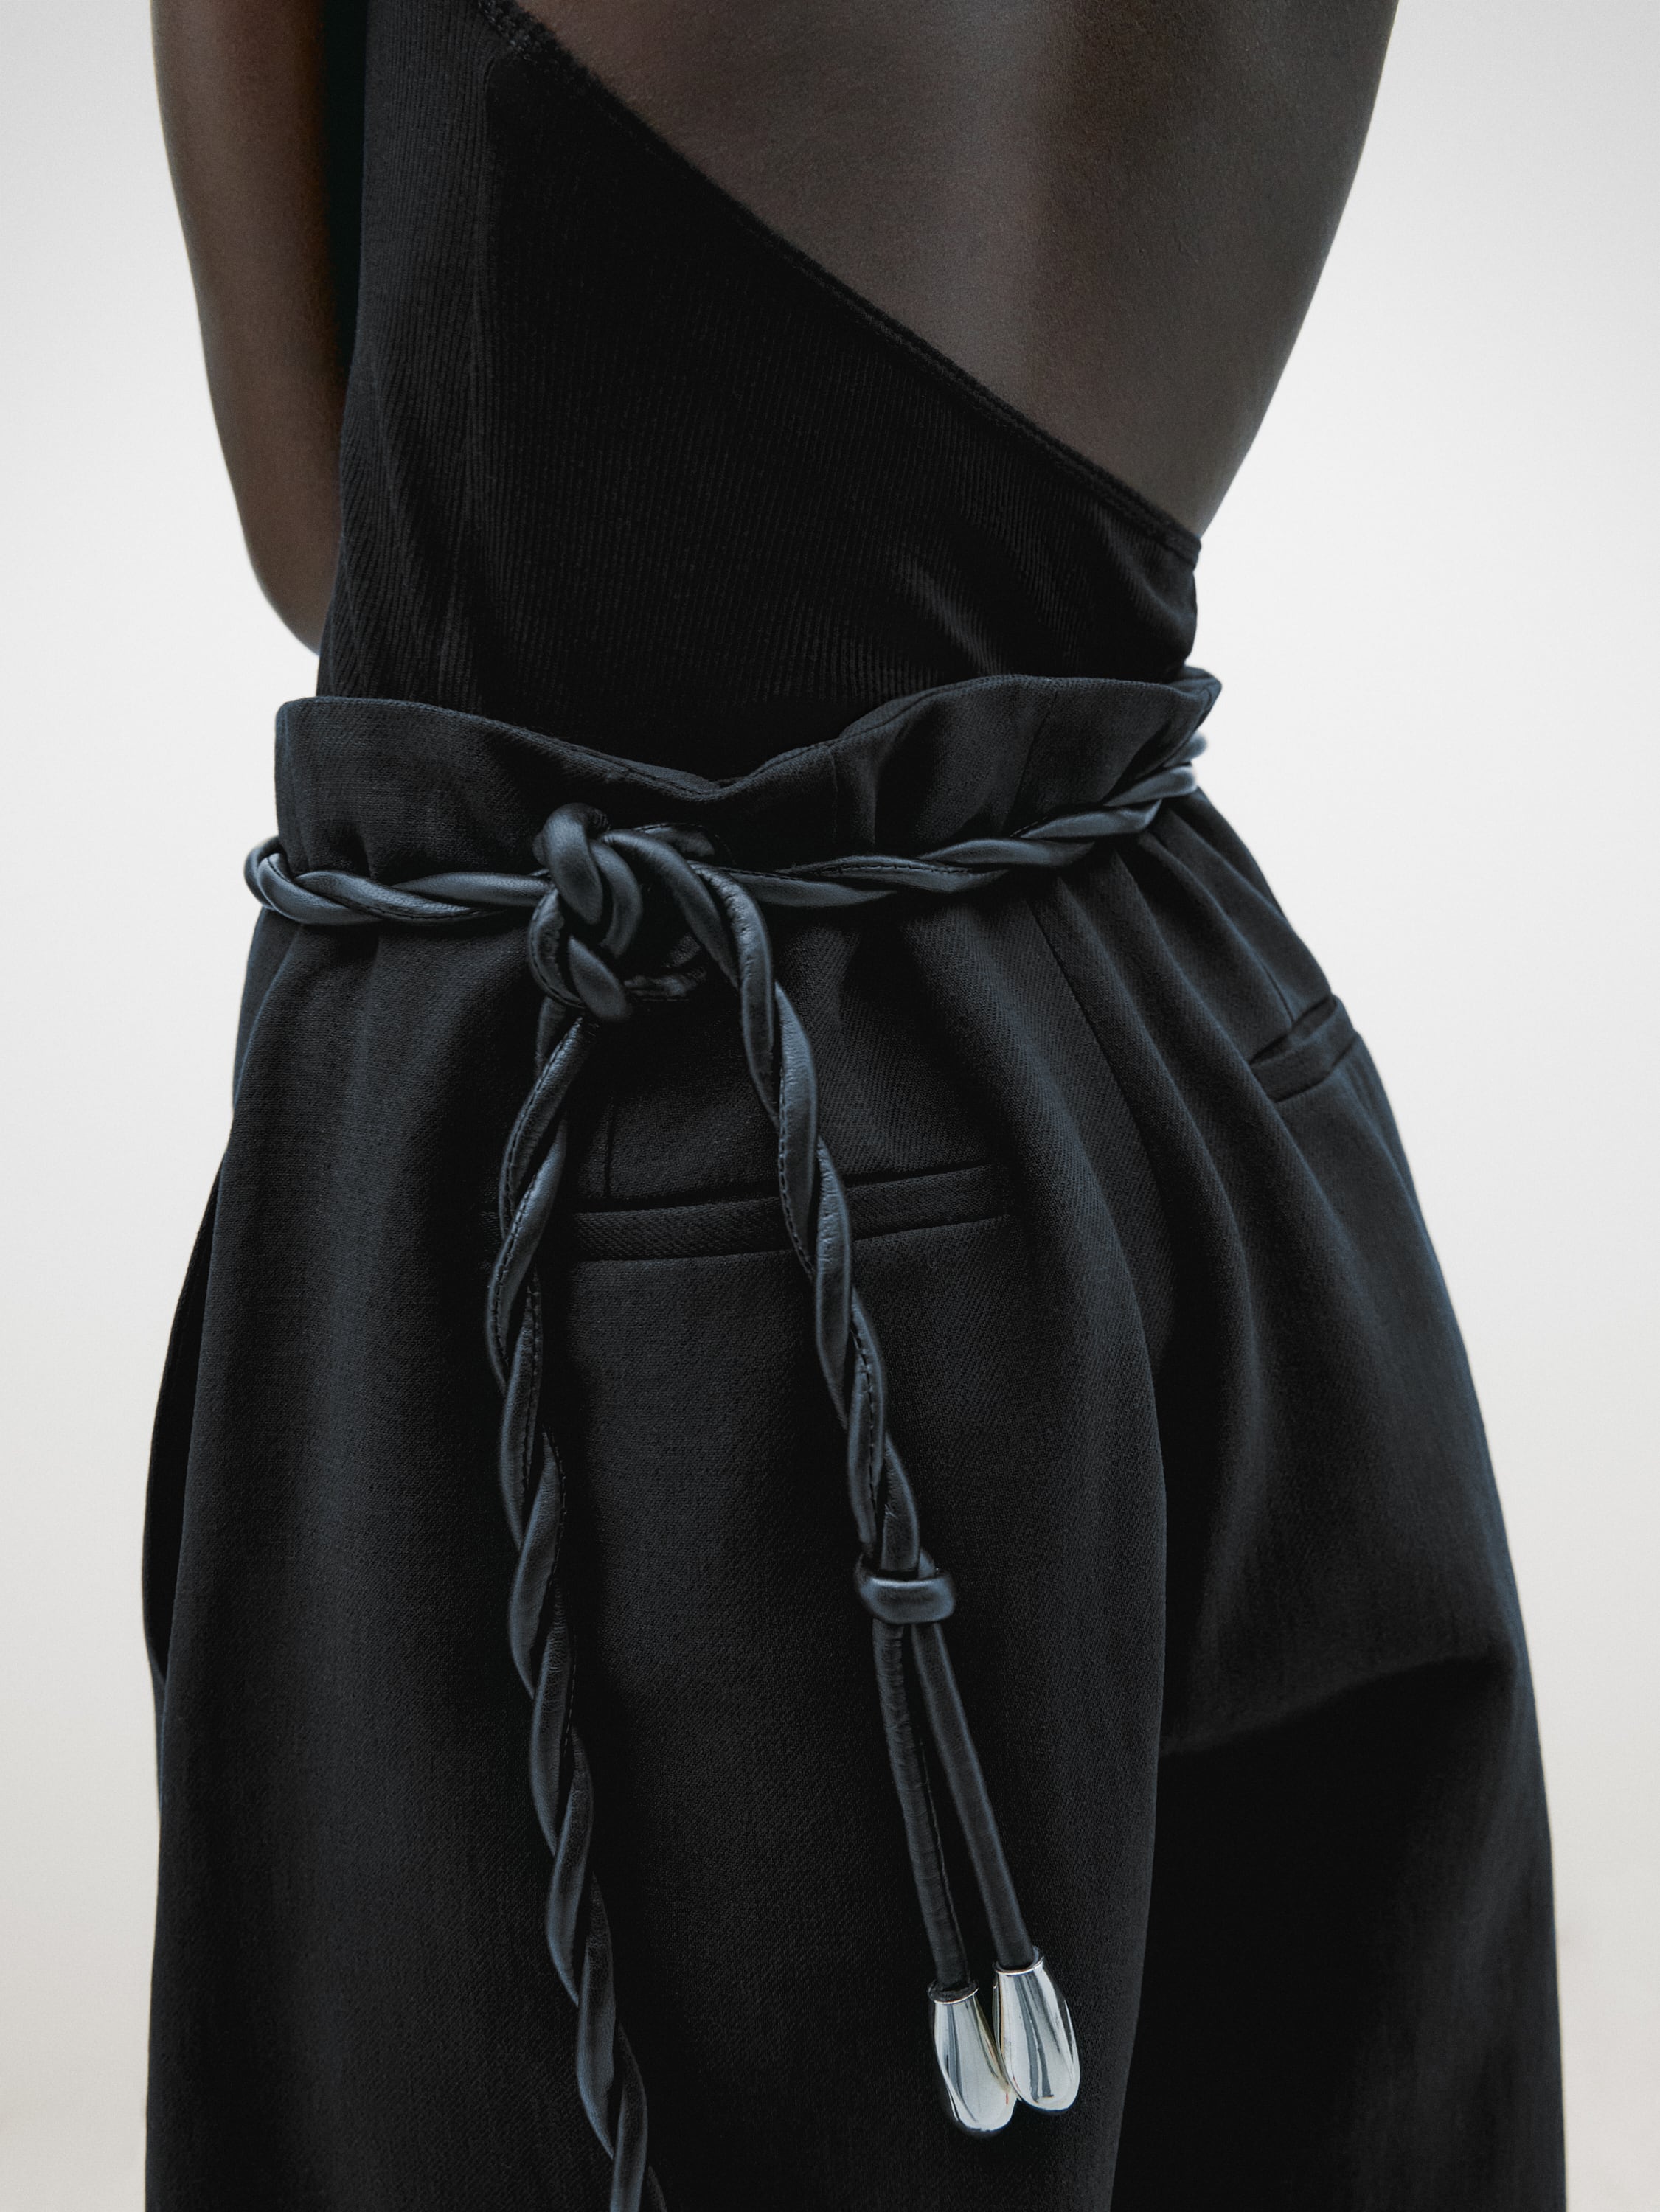 Nappa leather braided cord belt - Limited Edition